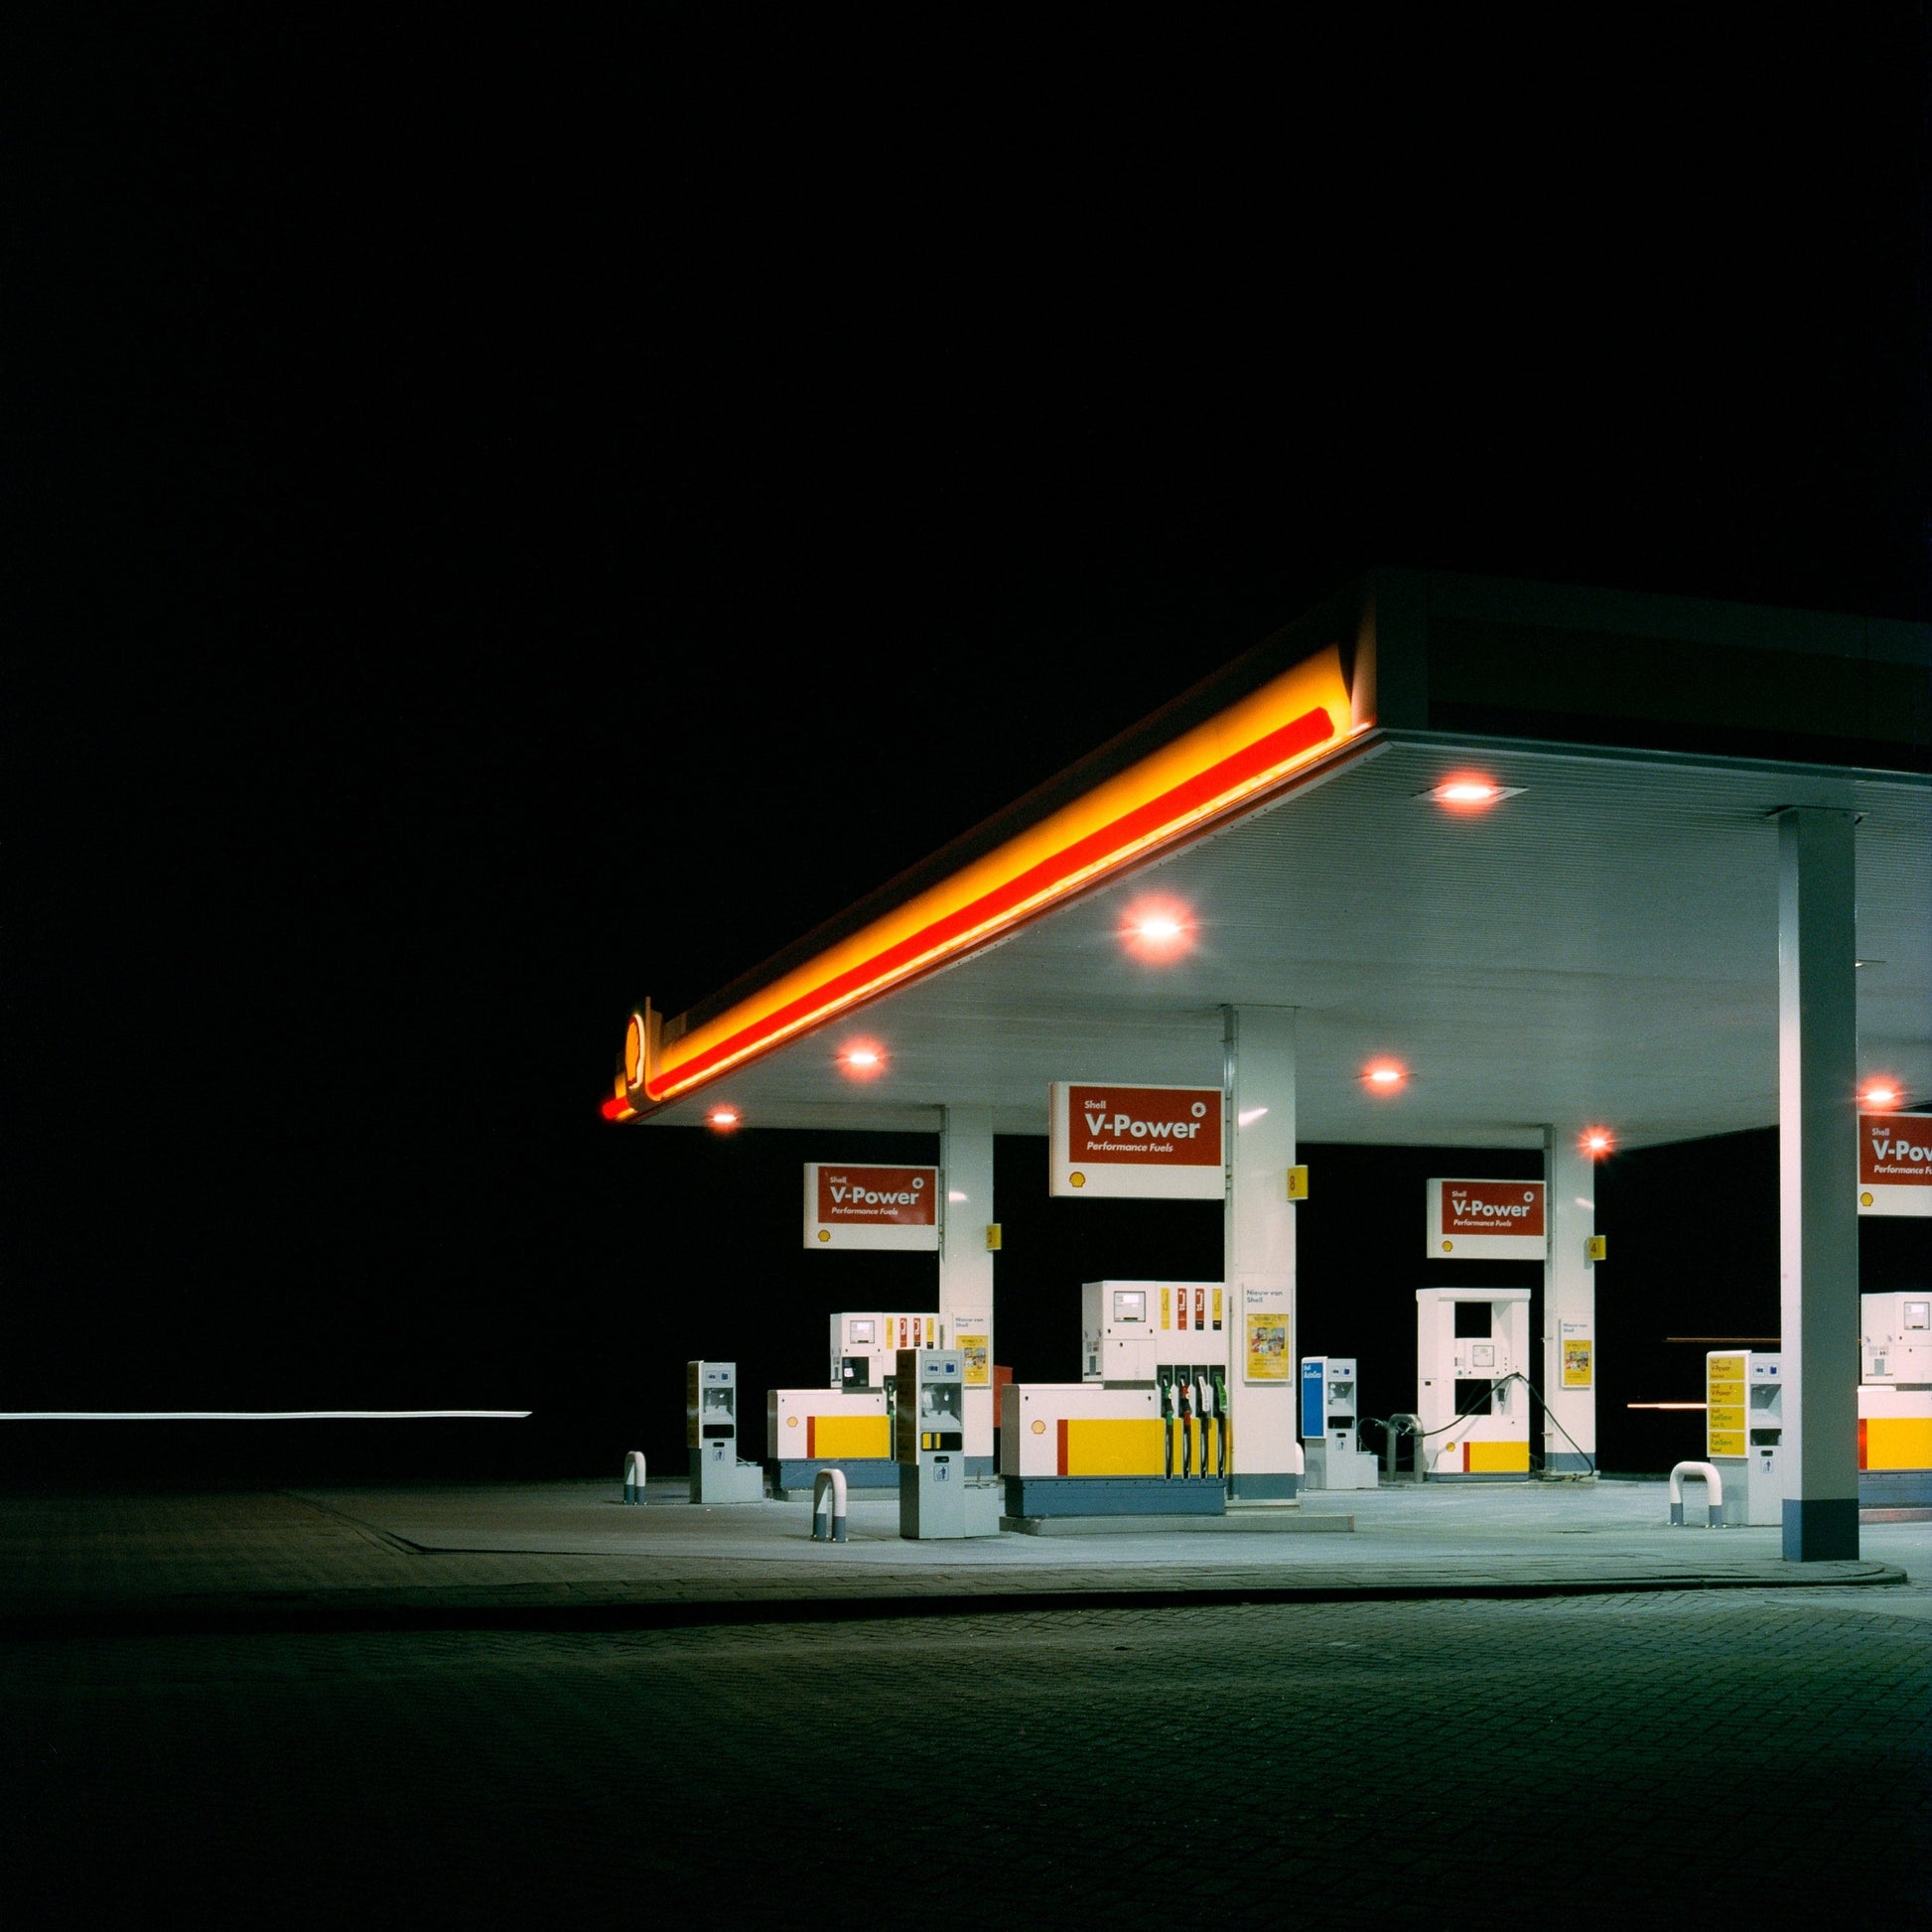 The artwork 'Exterior #7' by Jildo Tim Hof showing a brightly lit deserted Shell gas station surrounded by darkness